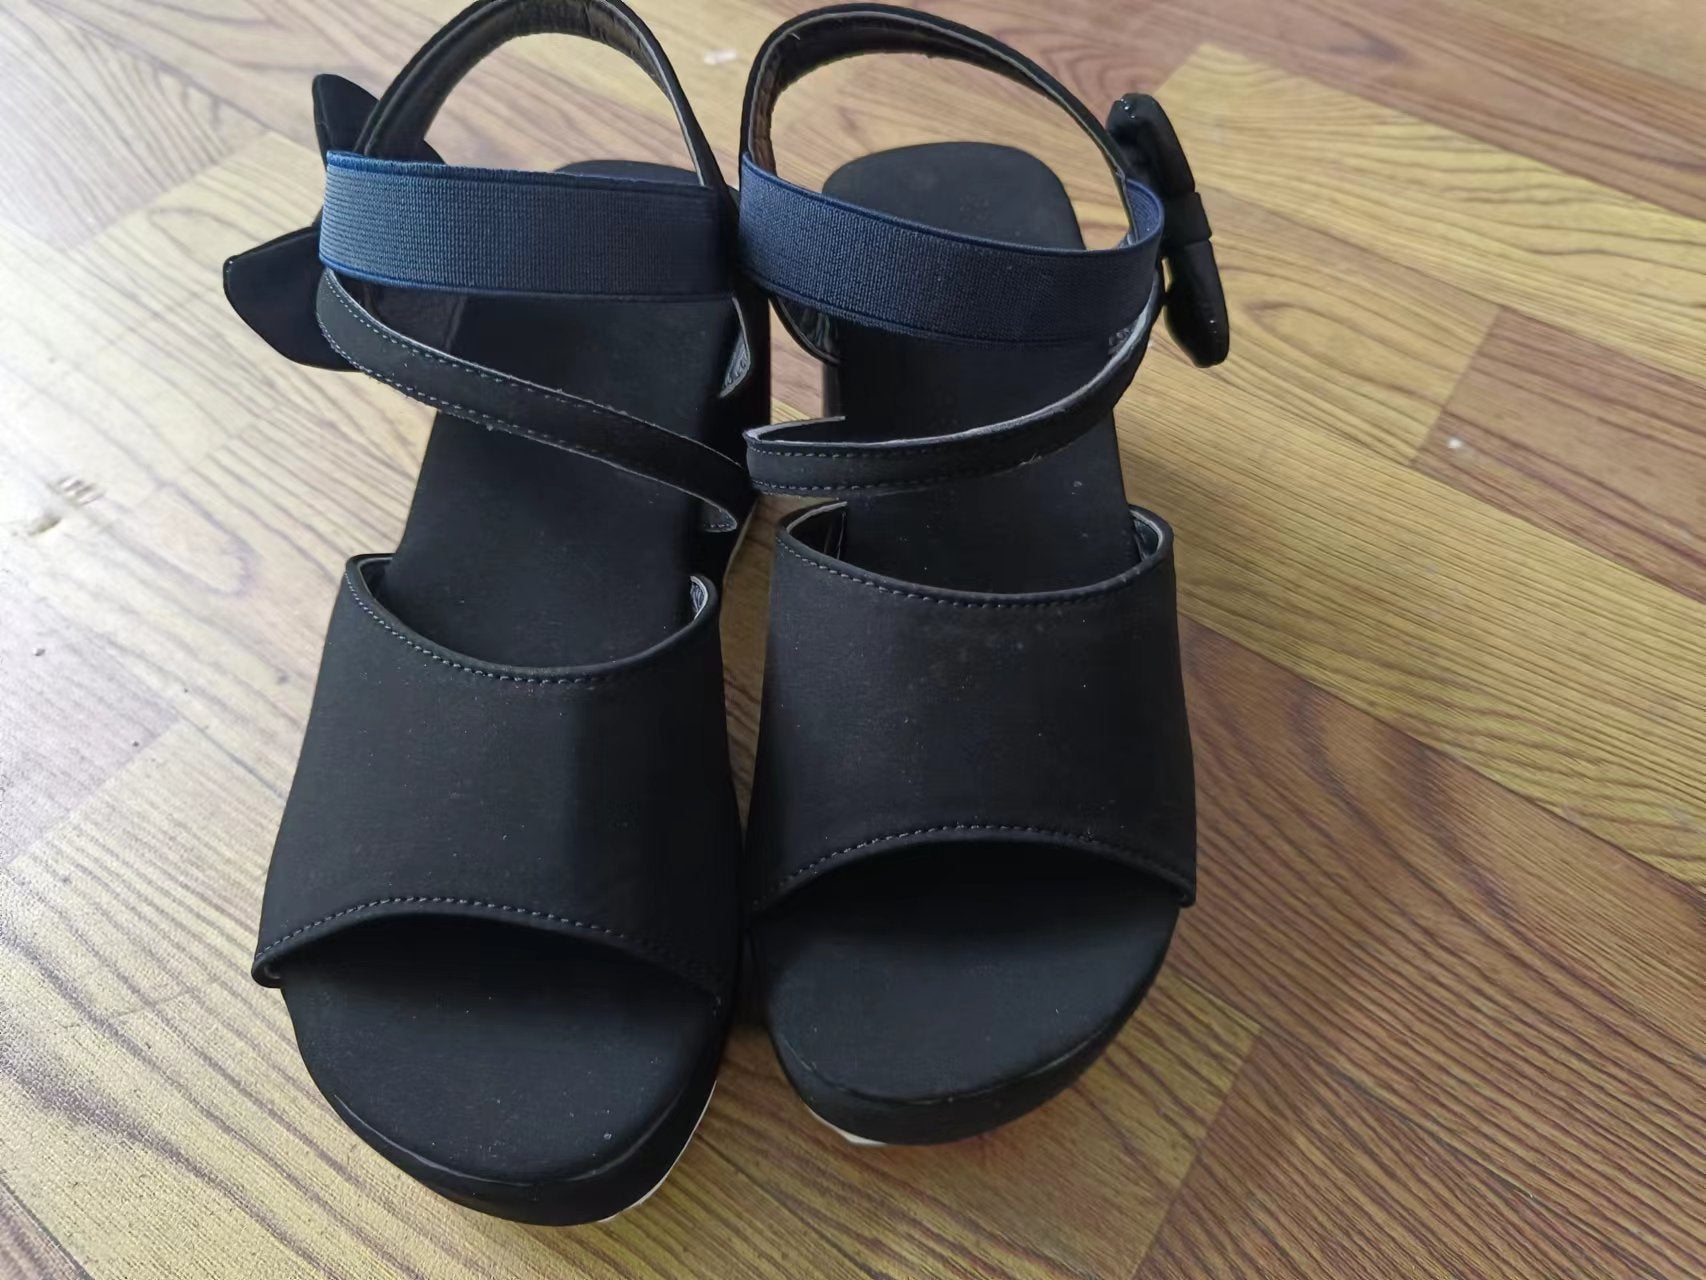 size S suede wedge sandals for women | Begogi Shop |